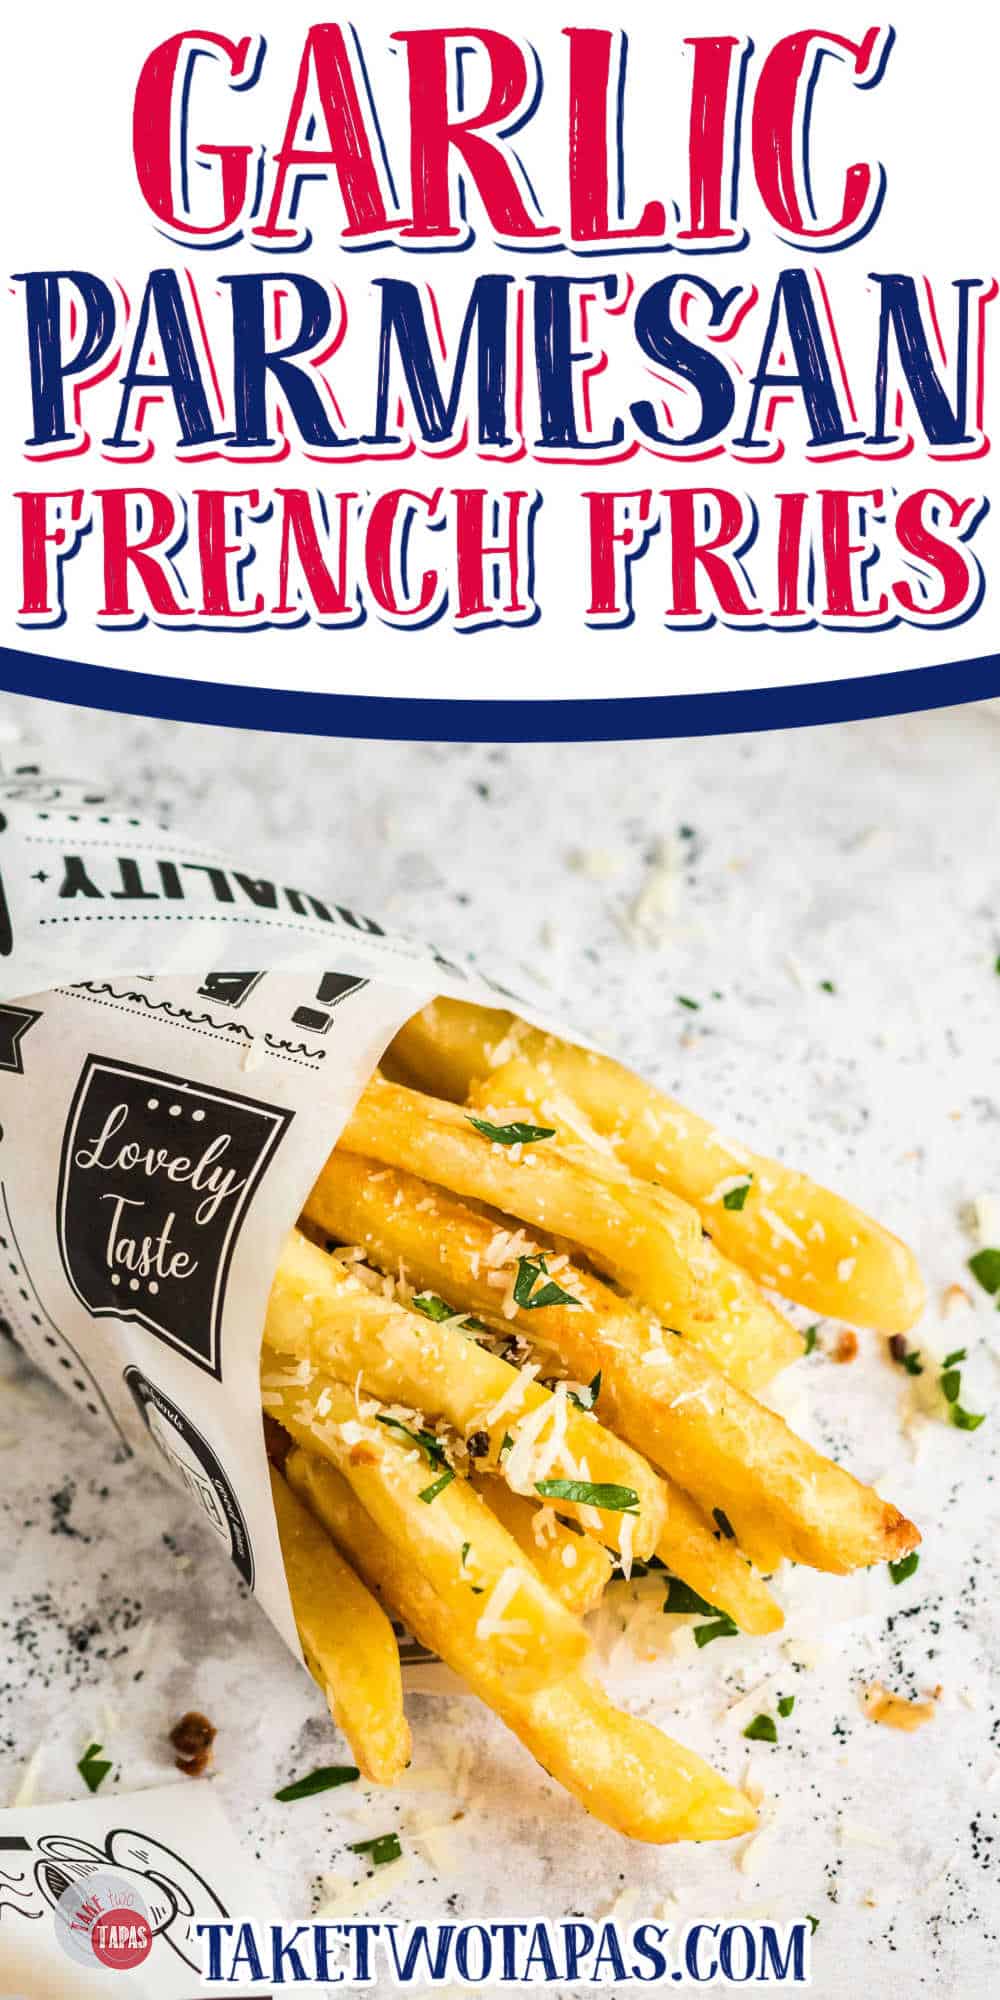 paper cone with text "garlic parmesan french fries"